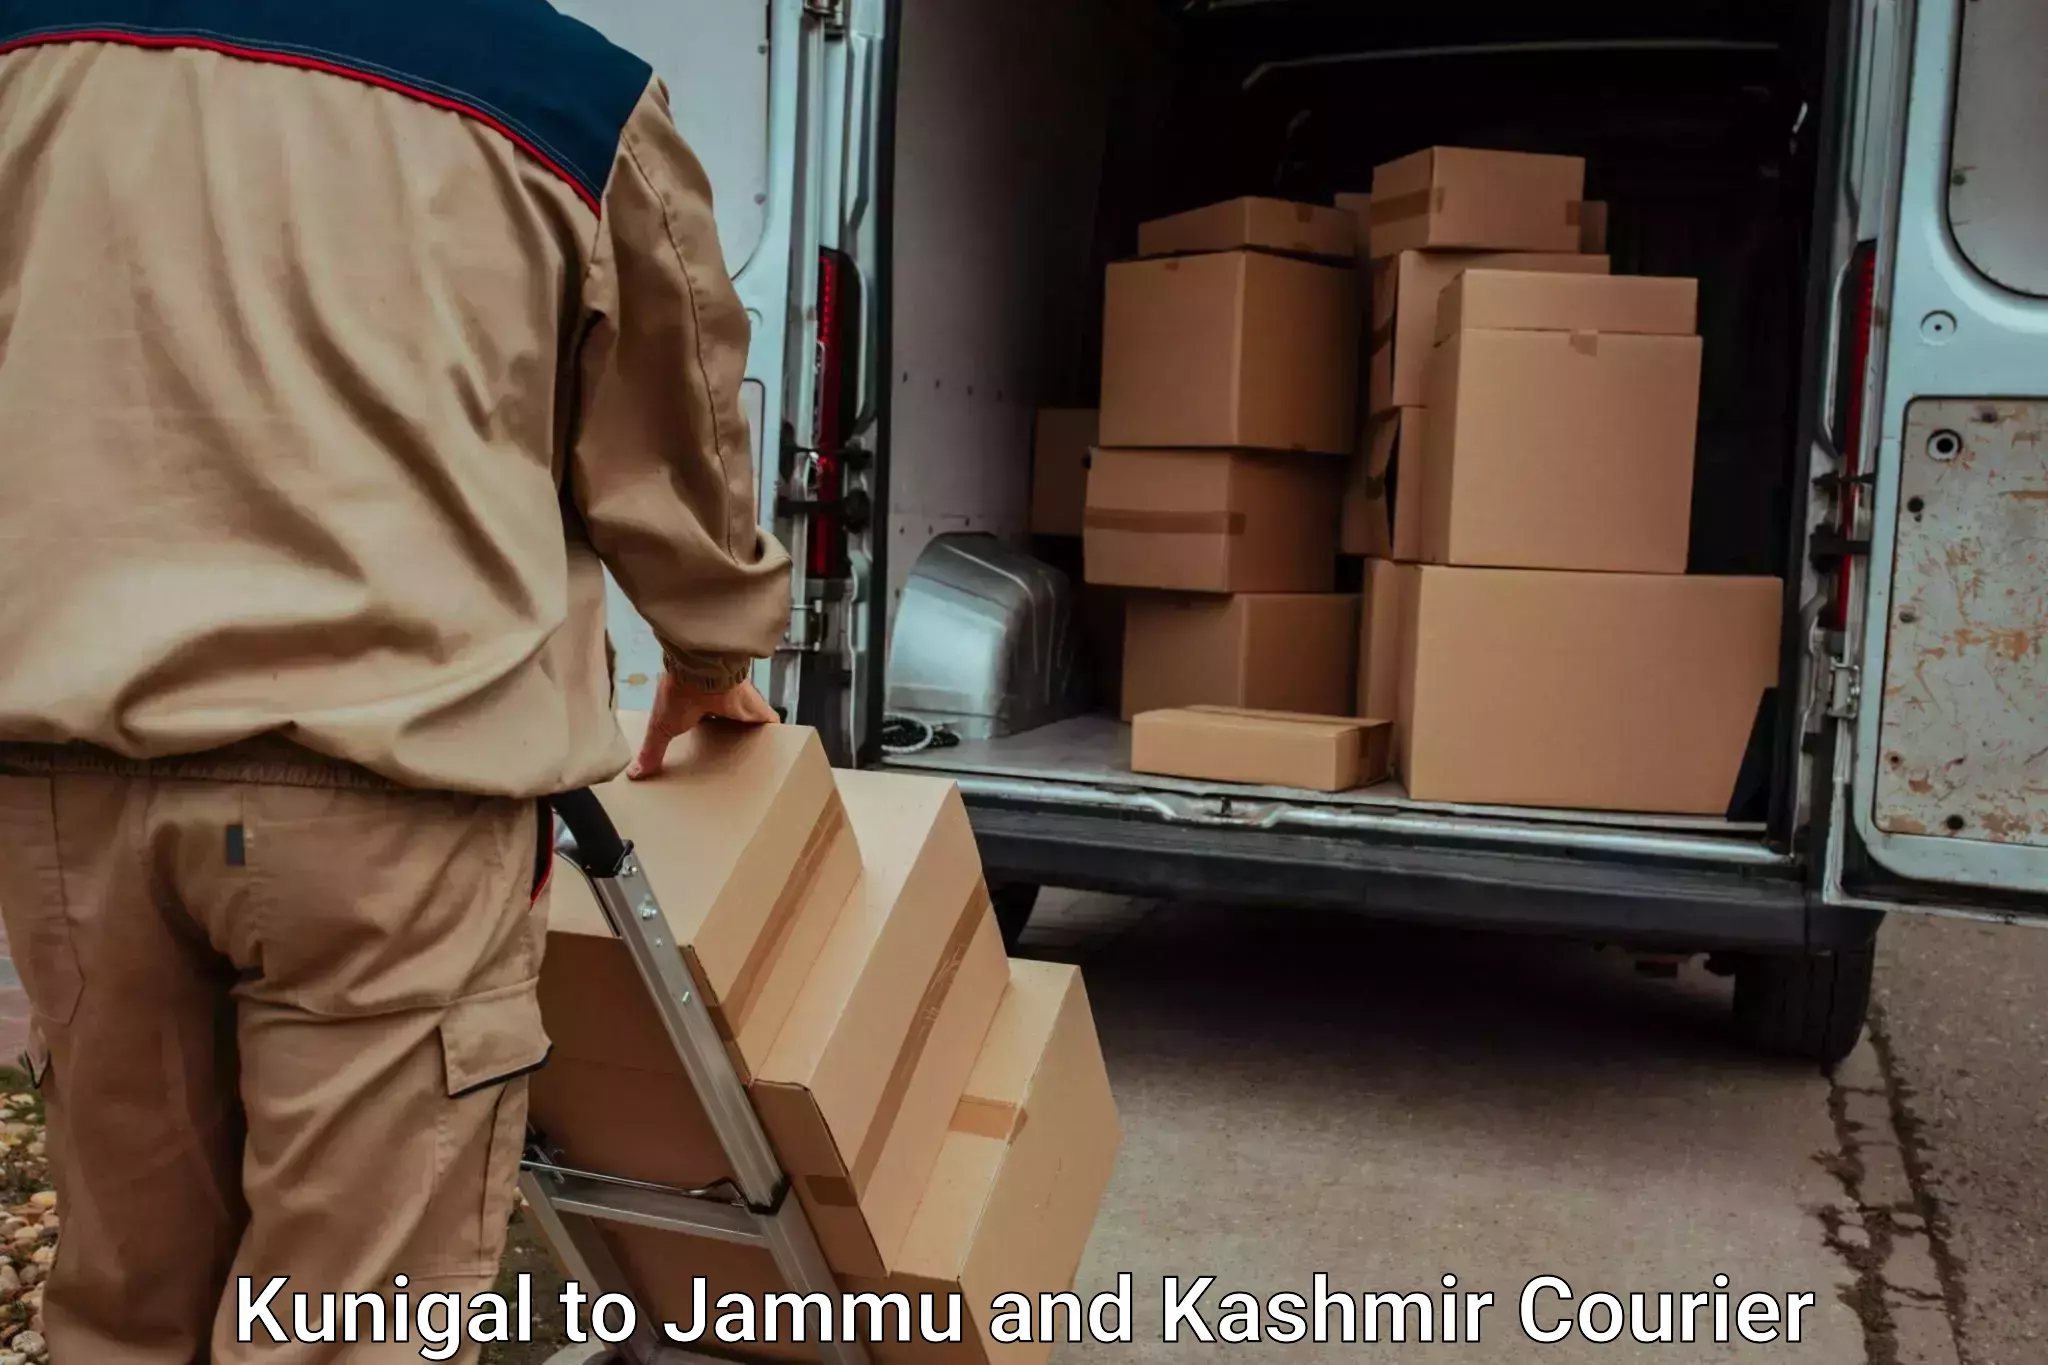 Quality relocation services in Kunigal to Jammu and Kashmir